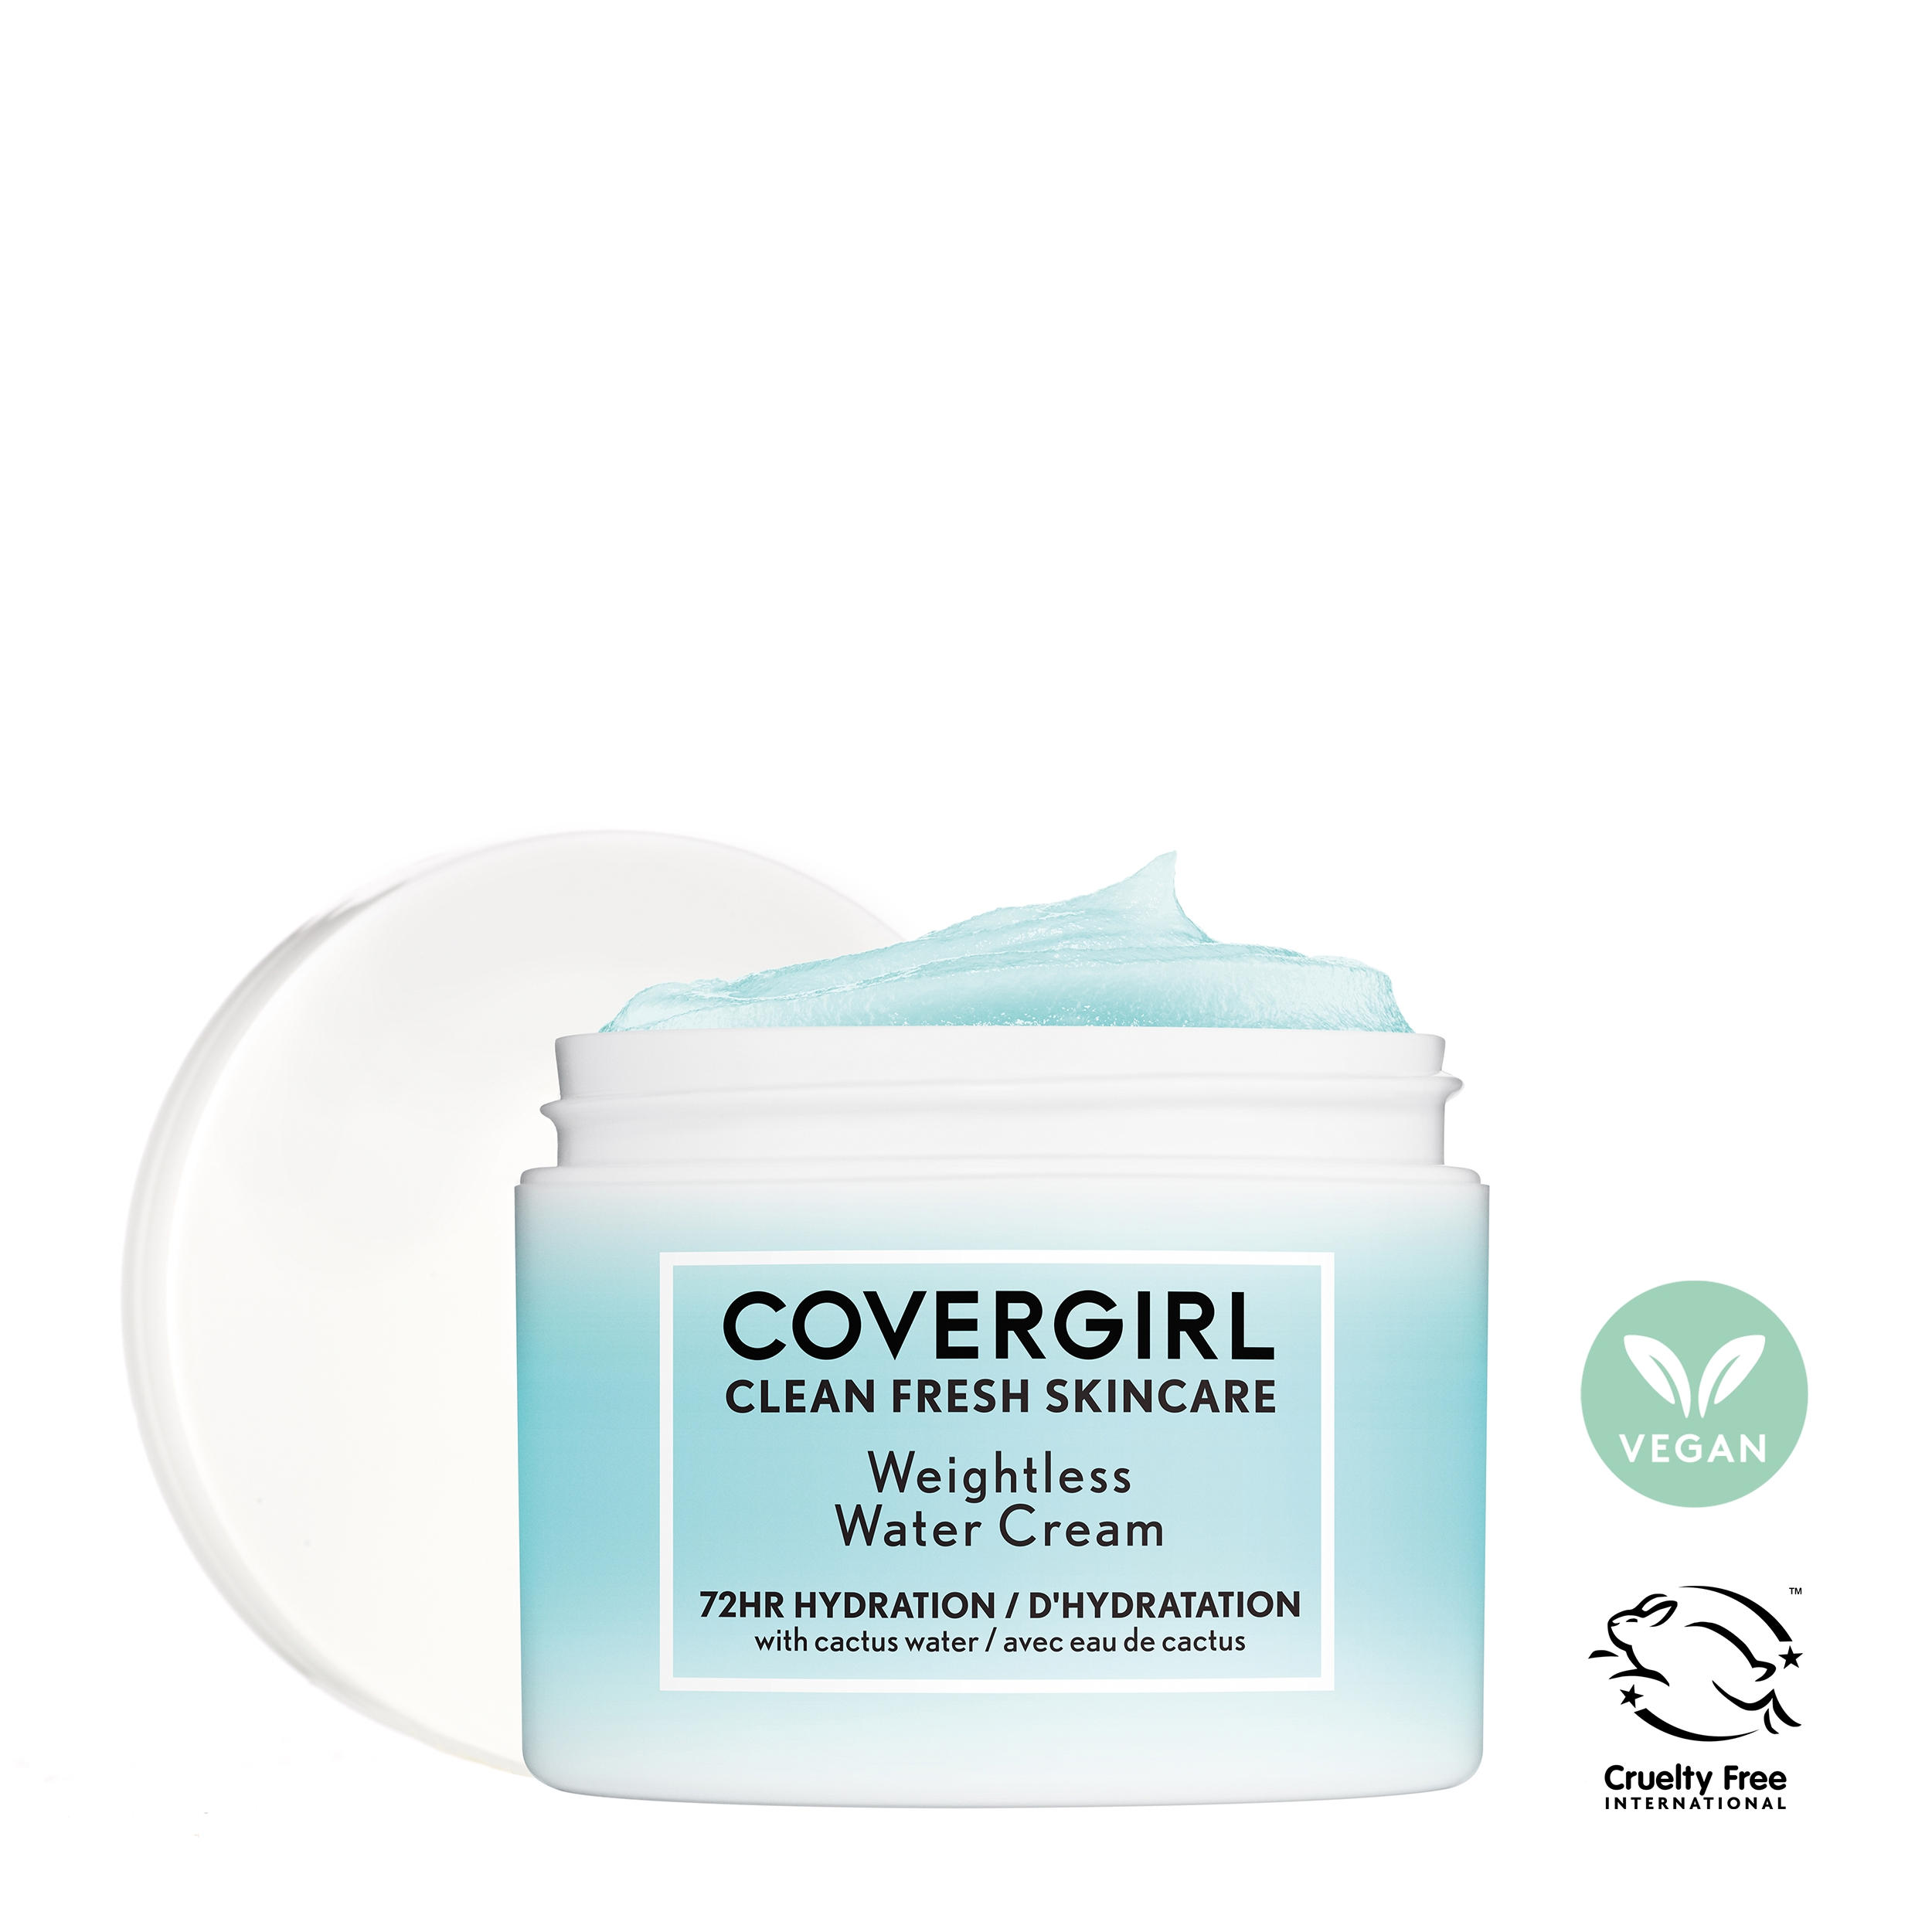 COVERGIRL Clean Fresh Skincare Weightless Water Cream Face Moisturizer, 2.0 fl oz - image 4 of 11